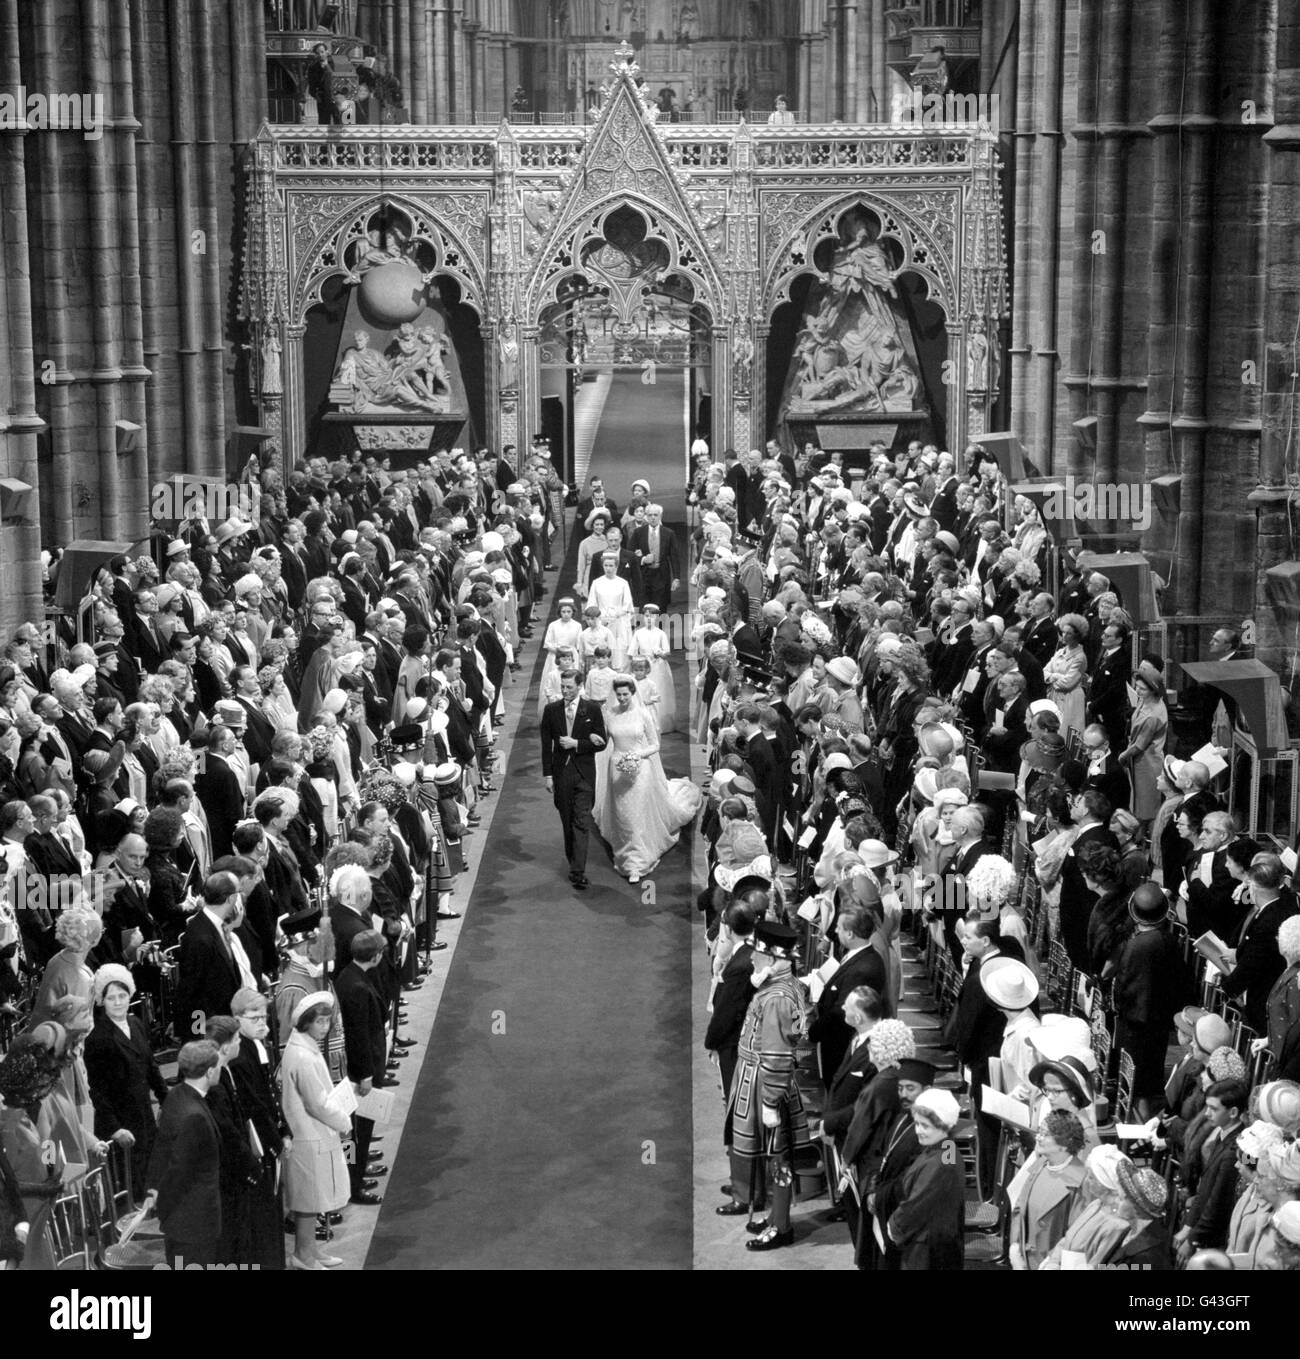 The bride and groom, Princess Alexandra and Angus Ogilvy, walk down the aisle after their wedding at Westminster Abbey. Stock Photo